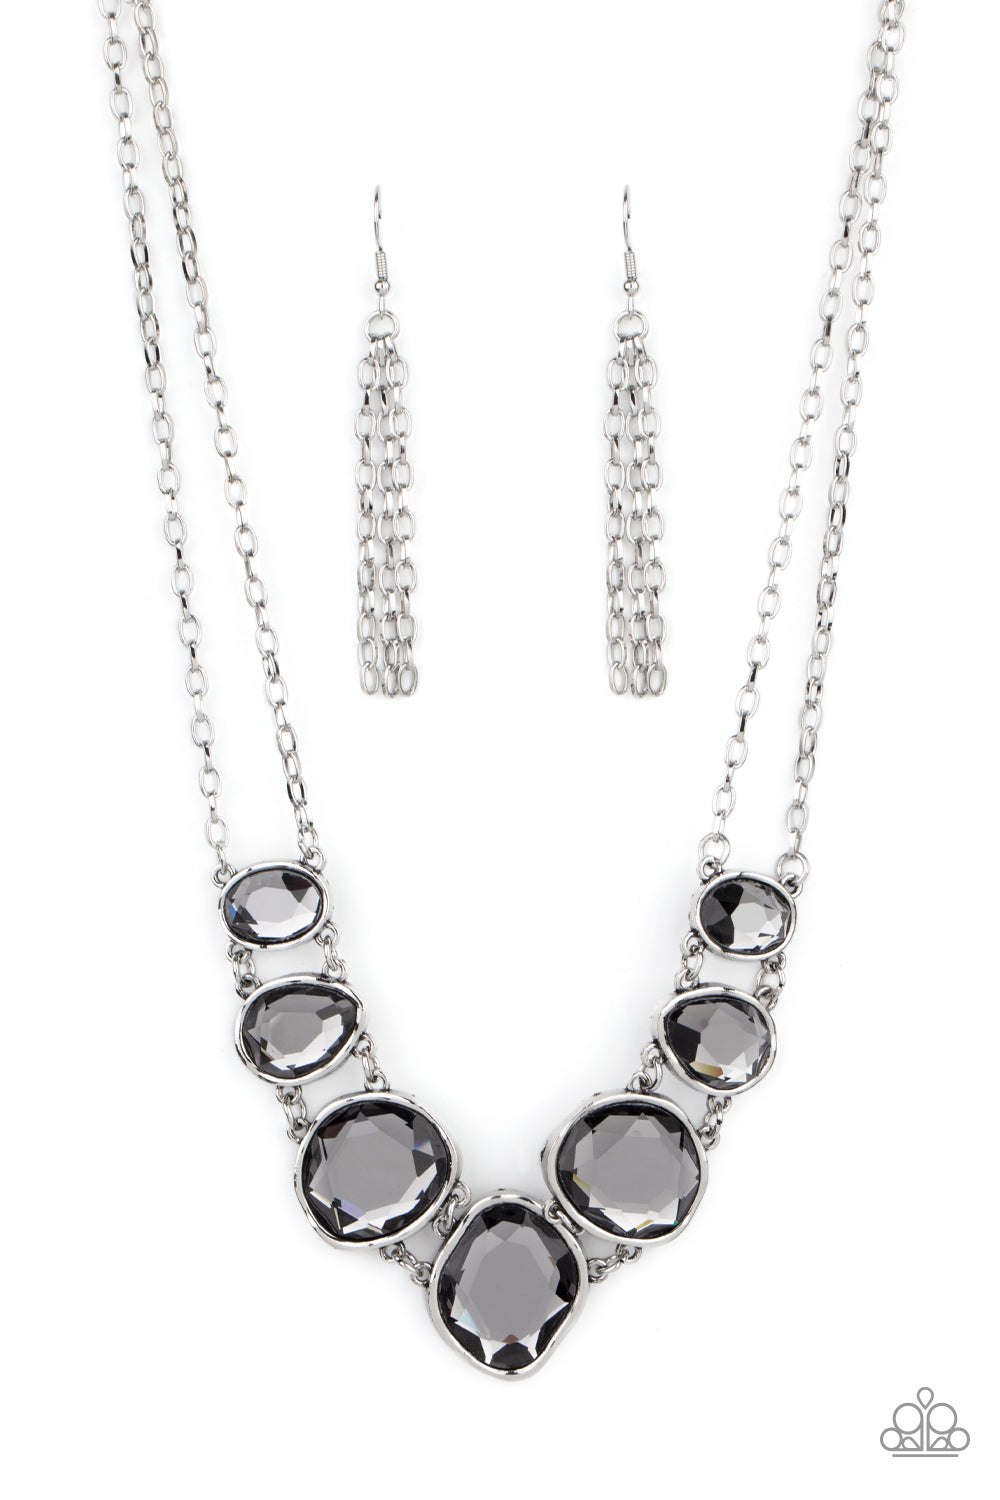 Absolute Admiration Silver Necklace - Paparazzi Accessories  Encased in hammered asymmetrical silver frames, an imperfect collection of faceted smoky gems are suspended from two shimmery silver chains as they double-link below the collar for a dramatic effect. Features an adjustable clasp closure.  Sold as one individual necklace. Includes one pair of matching earrings.